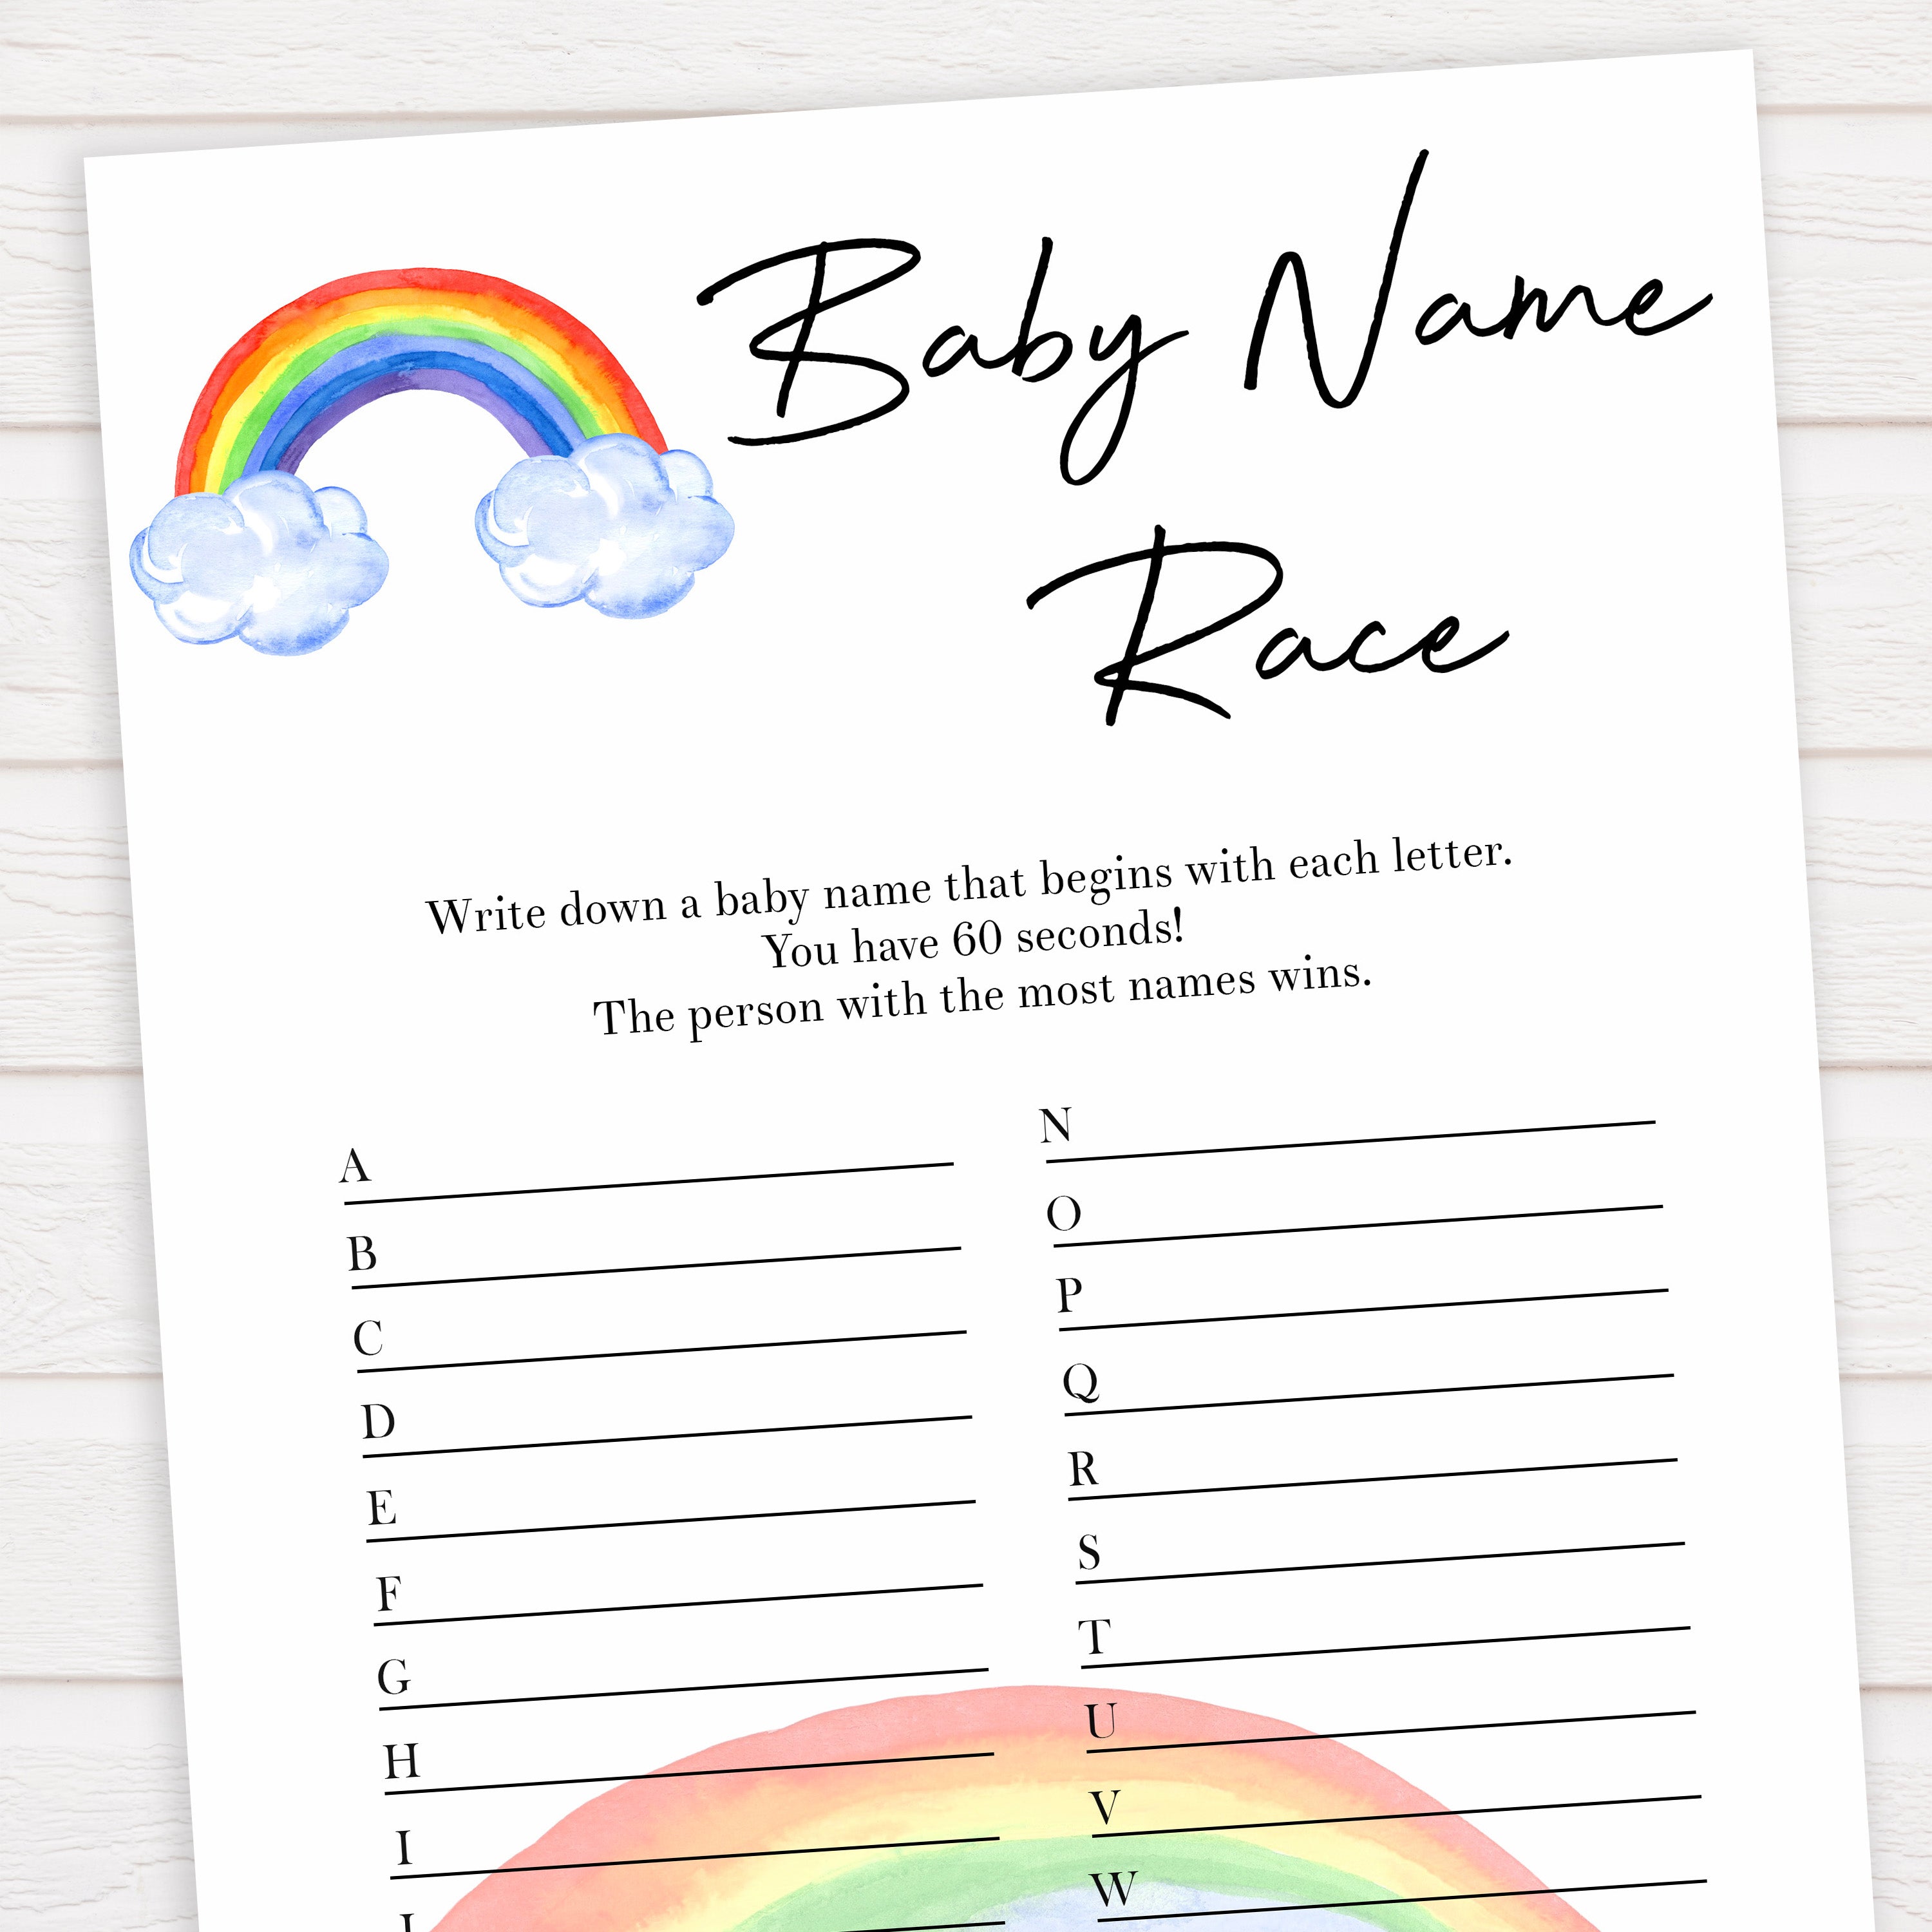 Rainbow baby games, rainbow baby name race, rainbow printable baby games, instant download games, rainbow baby shower, printable baby games, fun baby games, popular baby games, top 10 baby games